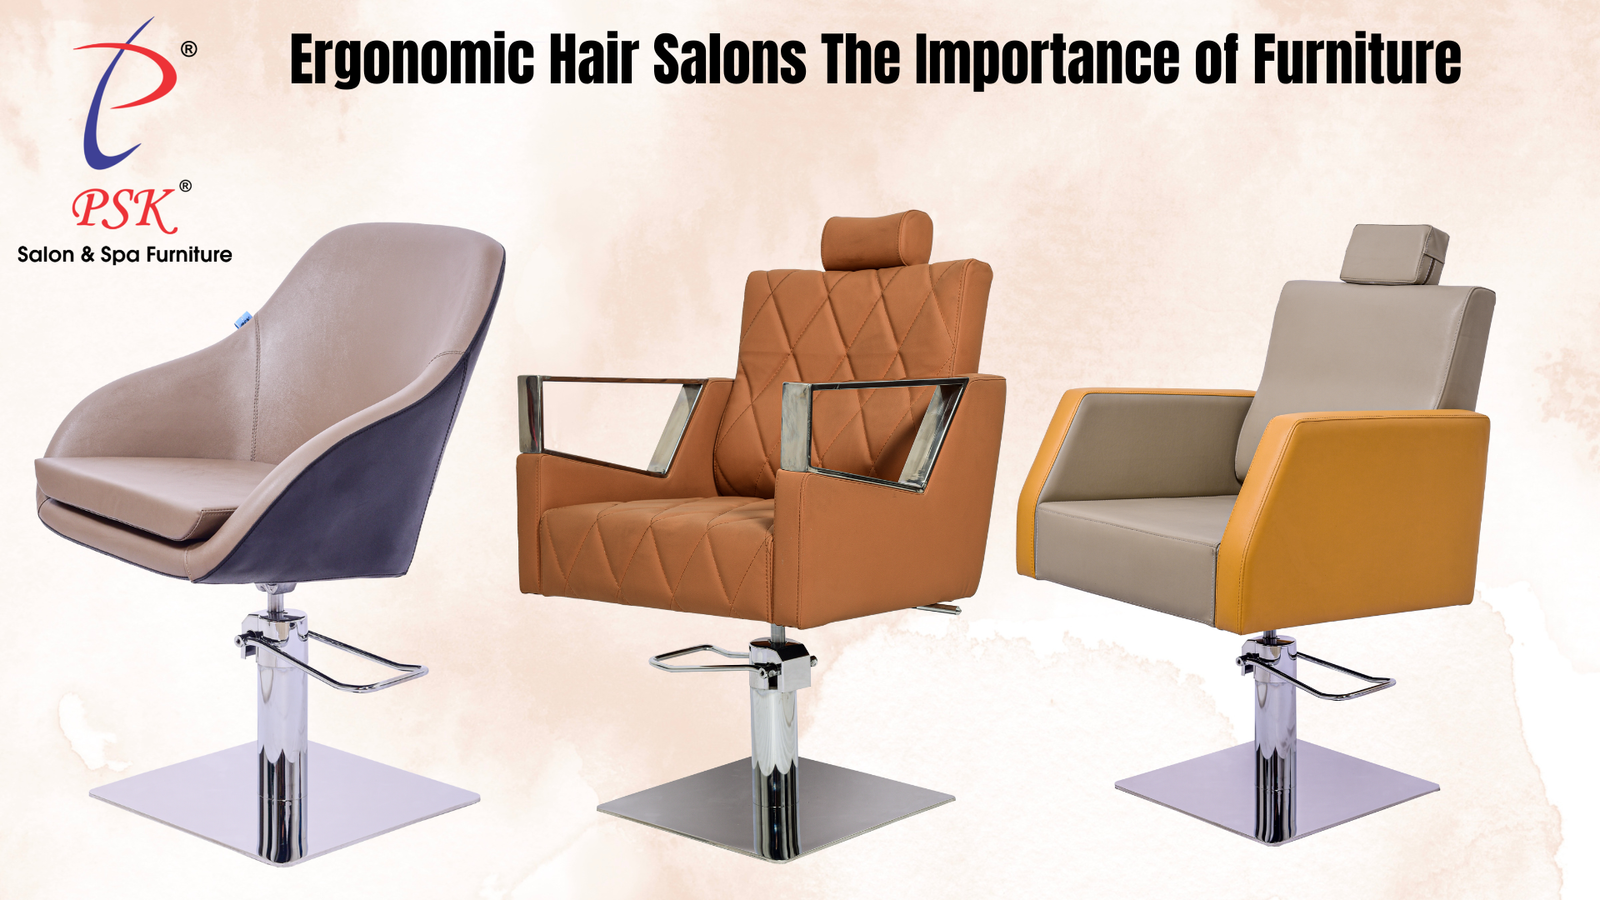 You are currently viewing Ergonomic Hair Salons The Importance of Furniture.